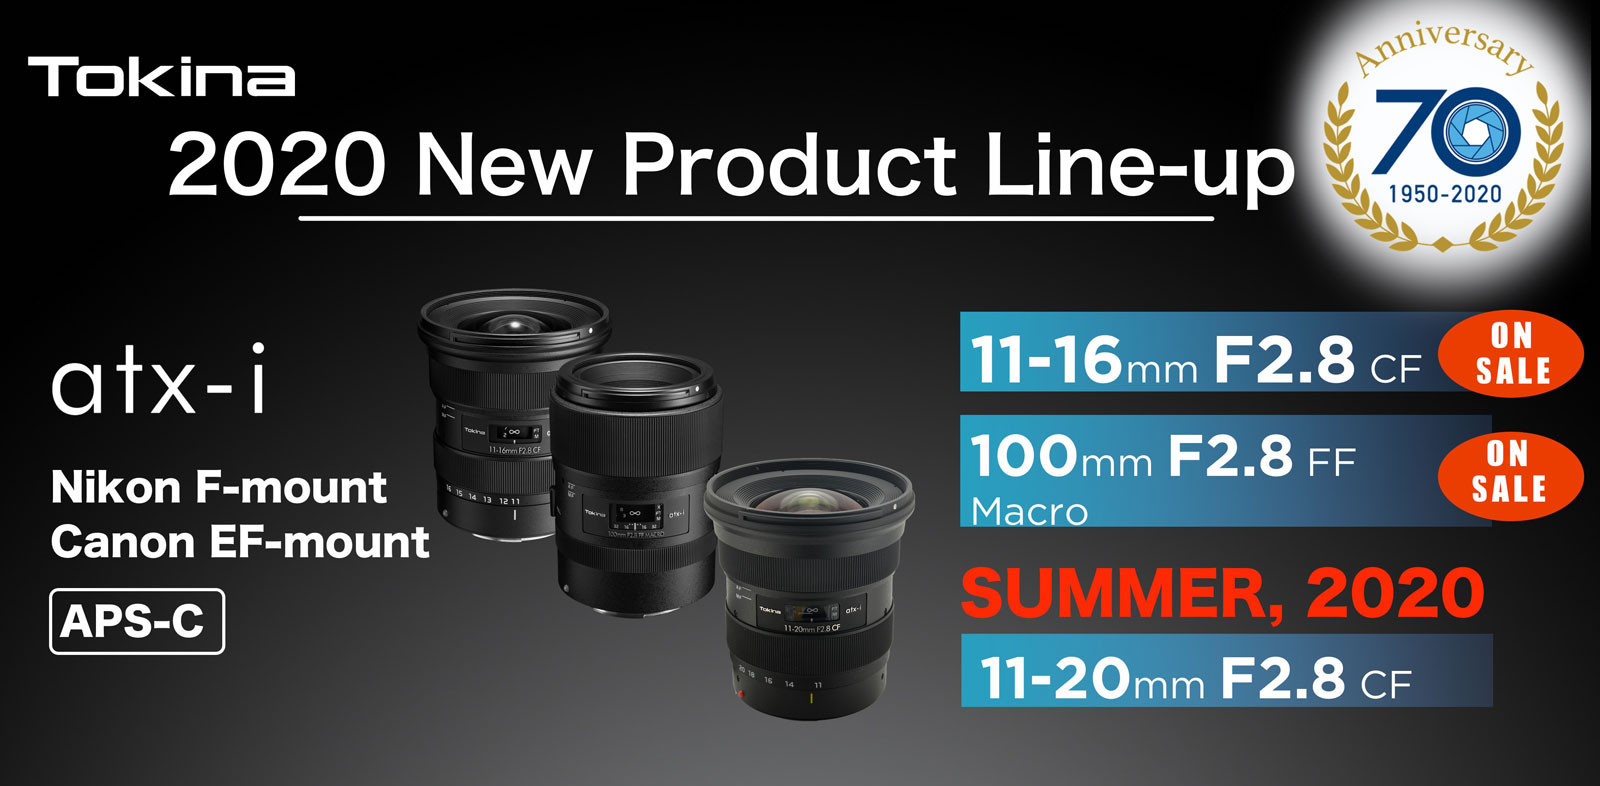 Tokina to announce a new 11–20mm f/2.8 CF APS-C lens for Nikon F